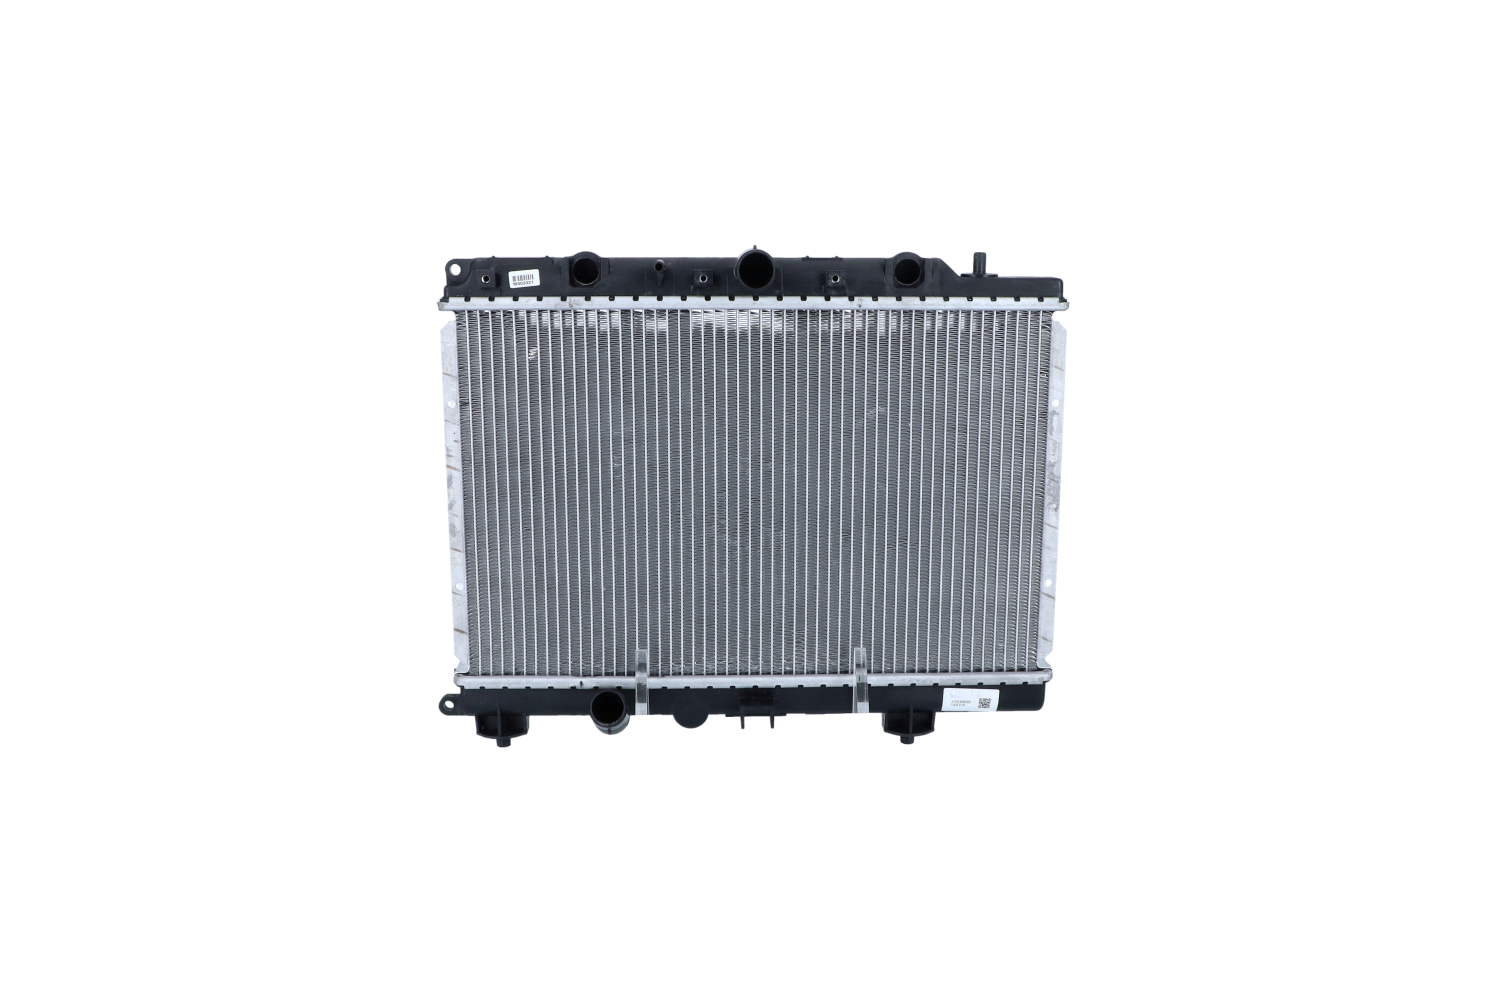 NRF EASY FIT Aluminium, 498 x 320 x 32 mm, with mounting parts, Brazed cooling fins Radiator 55307 buy